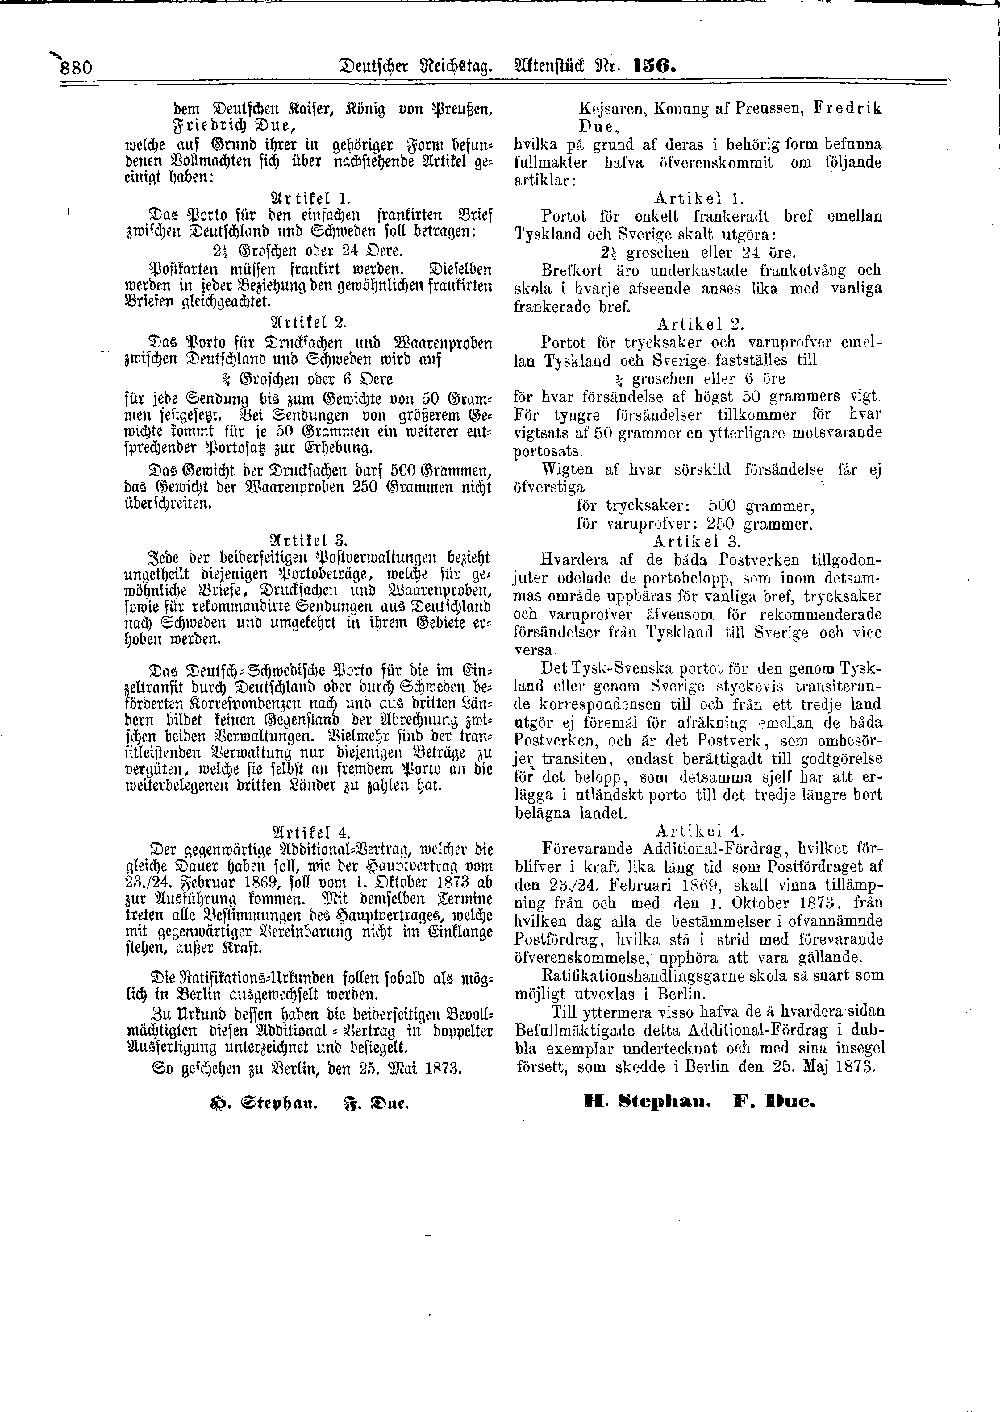 Scan of page 880